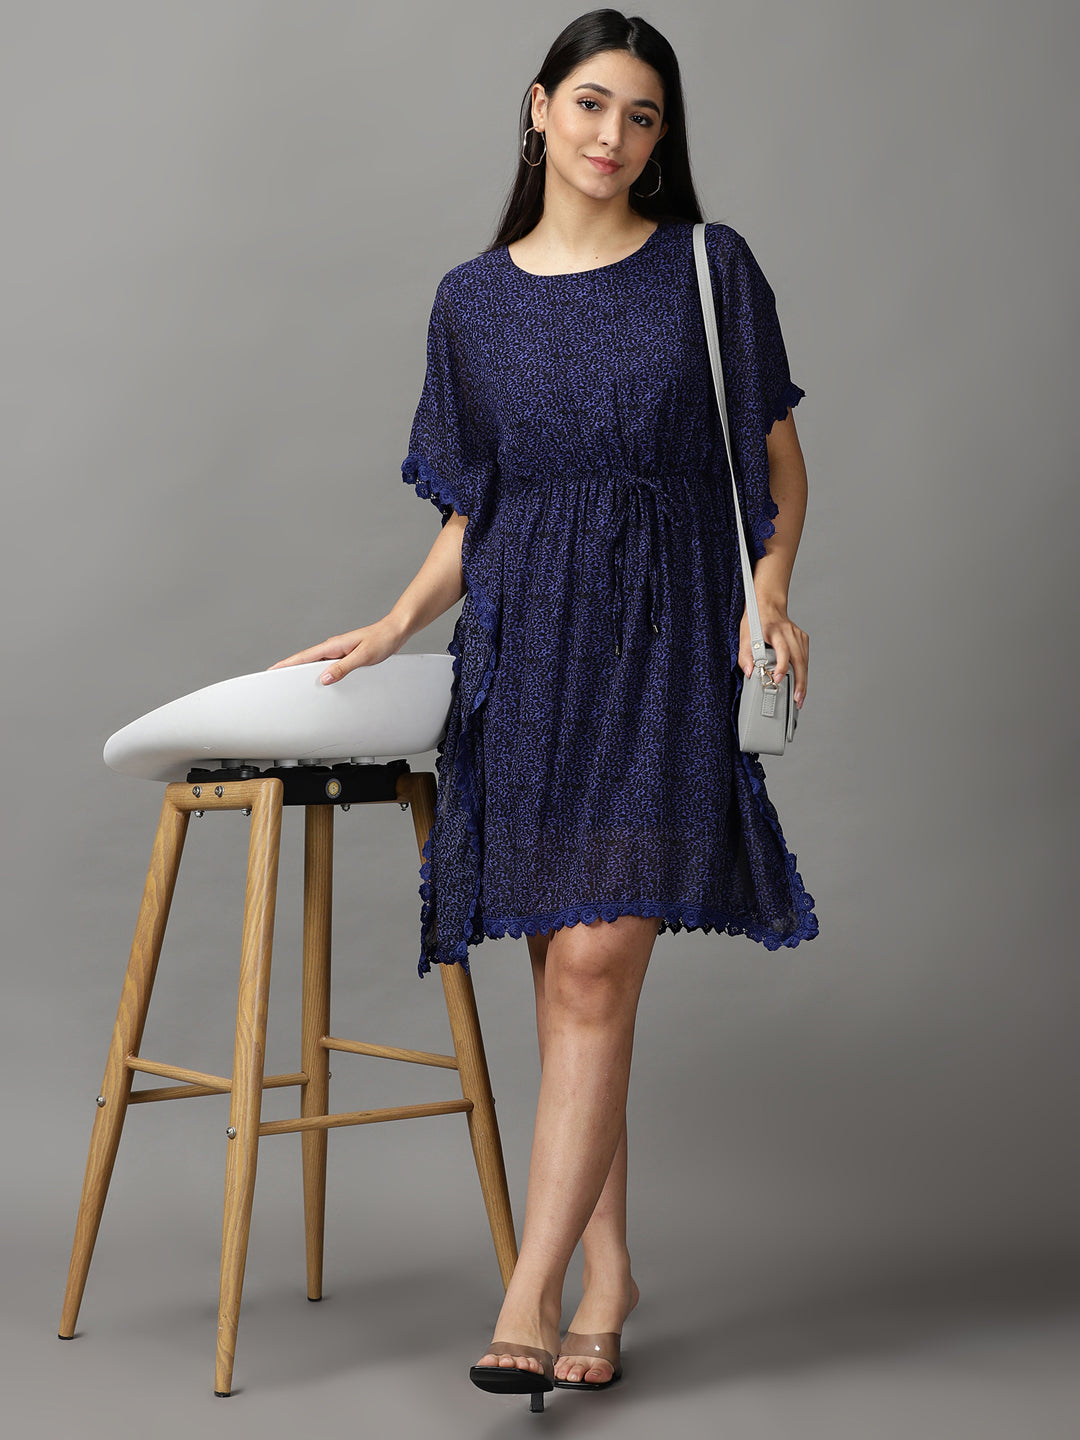 Women's Blue Floral Fit and Flare Dress